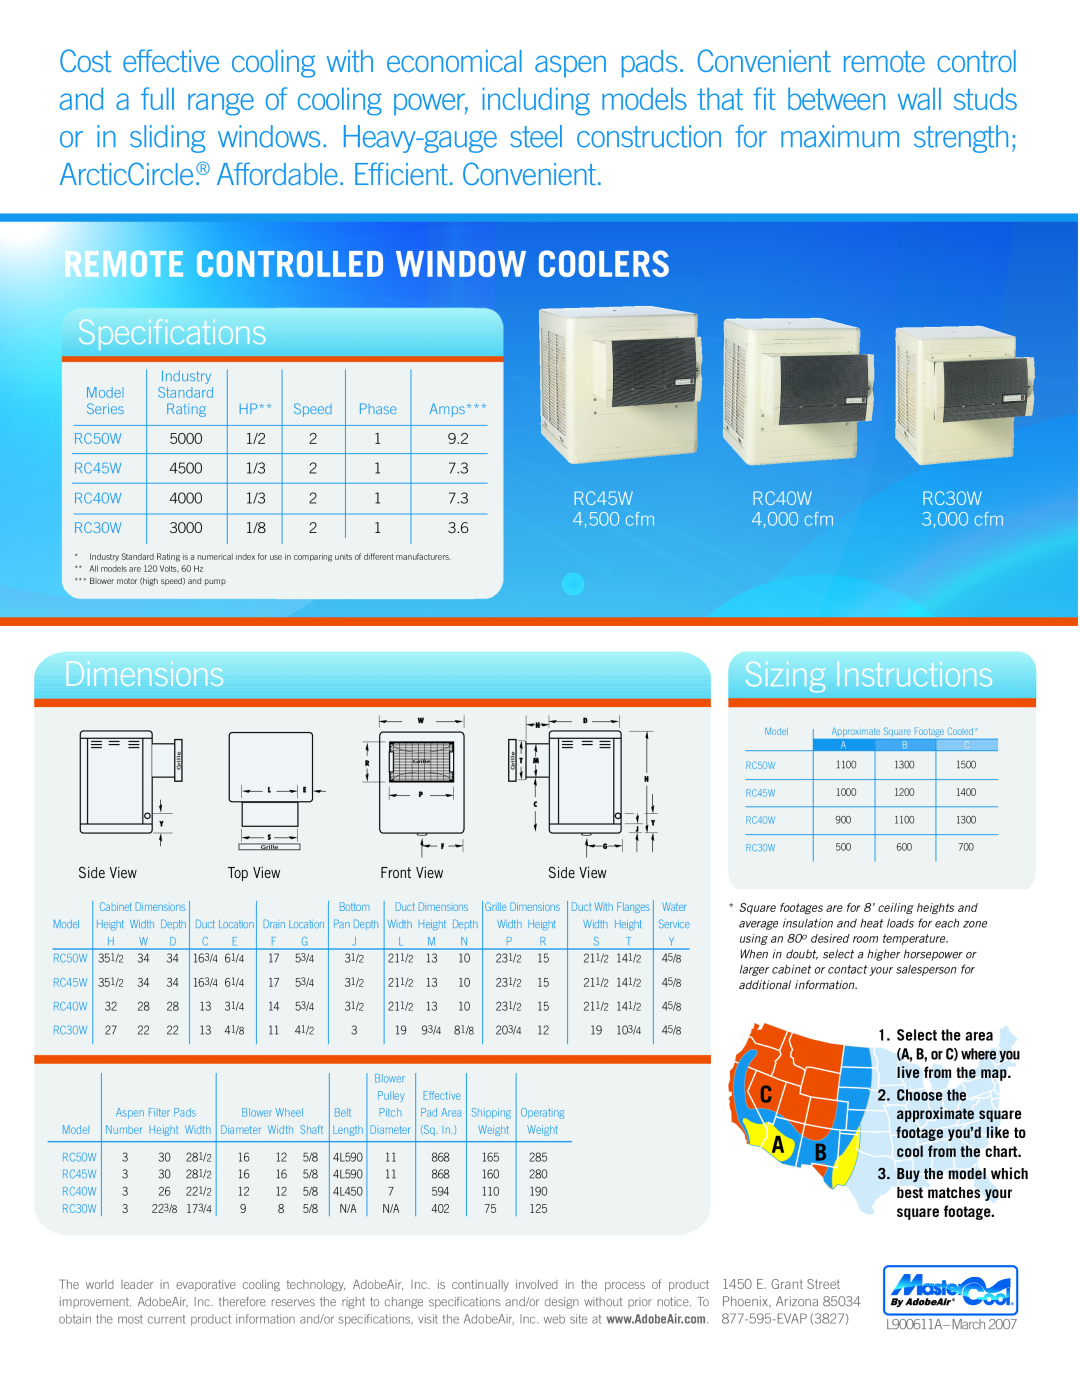 AdobeAir CM120A Specifications, Dimensions, Remote Controlled Window Coolers, Sizing Instructions, 3,000 cfm, Model, RC50W 